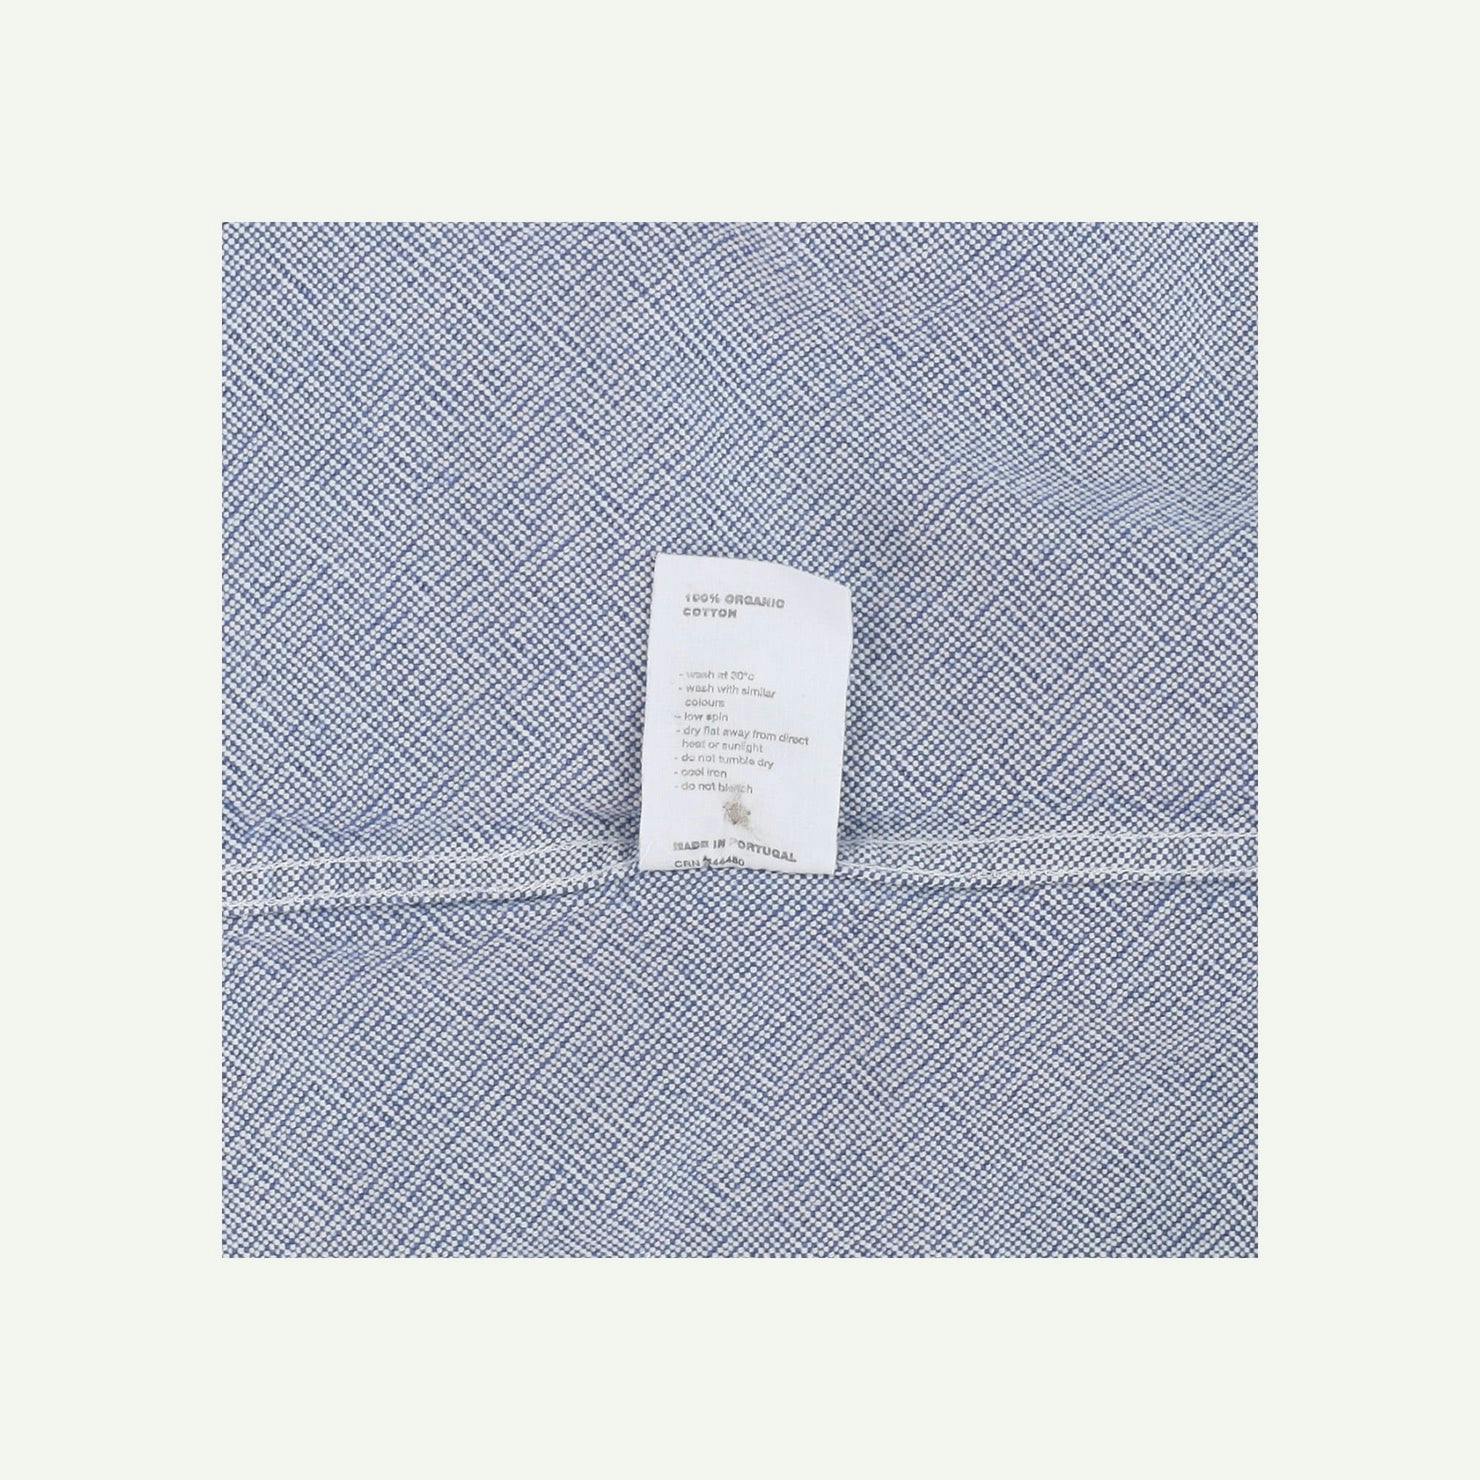 Finisterre Repaired Blue Shirt